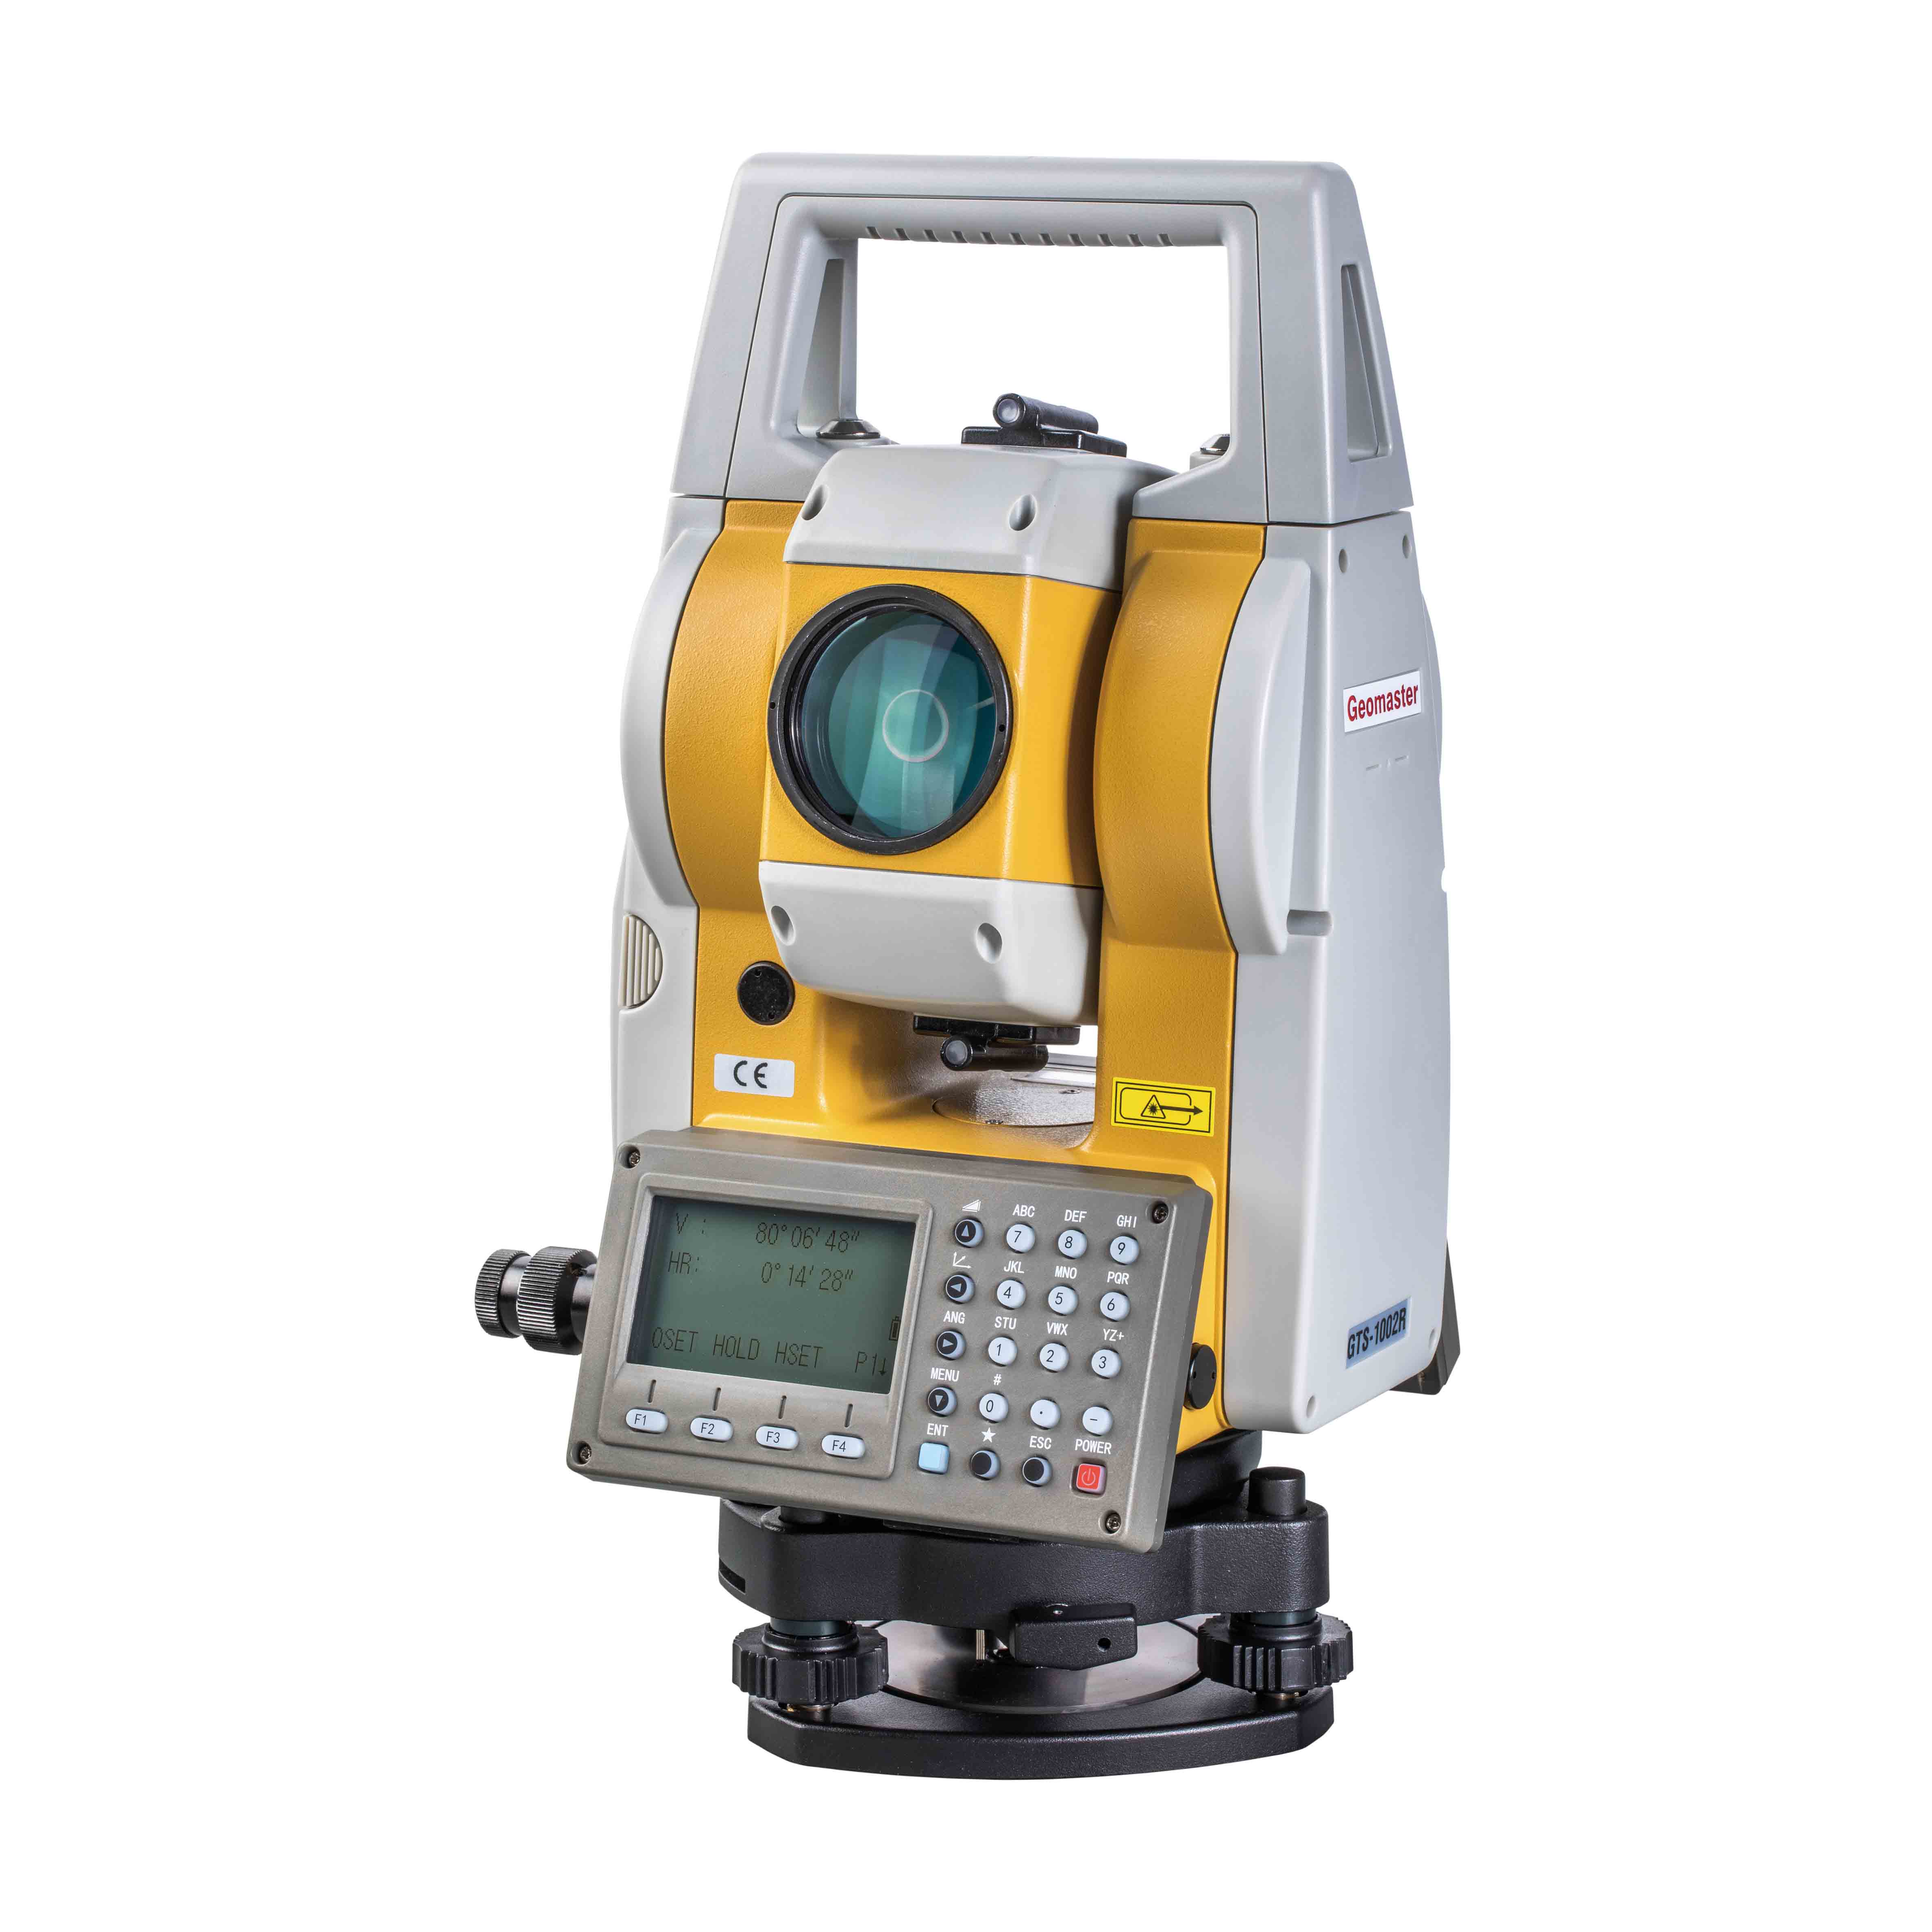 Reflectorless Total Station GTS-1002R